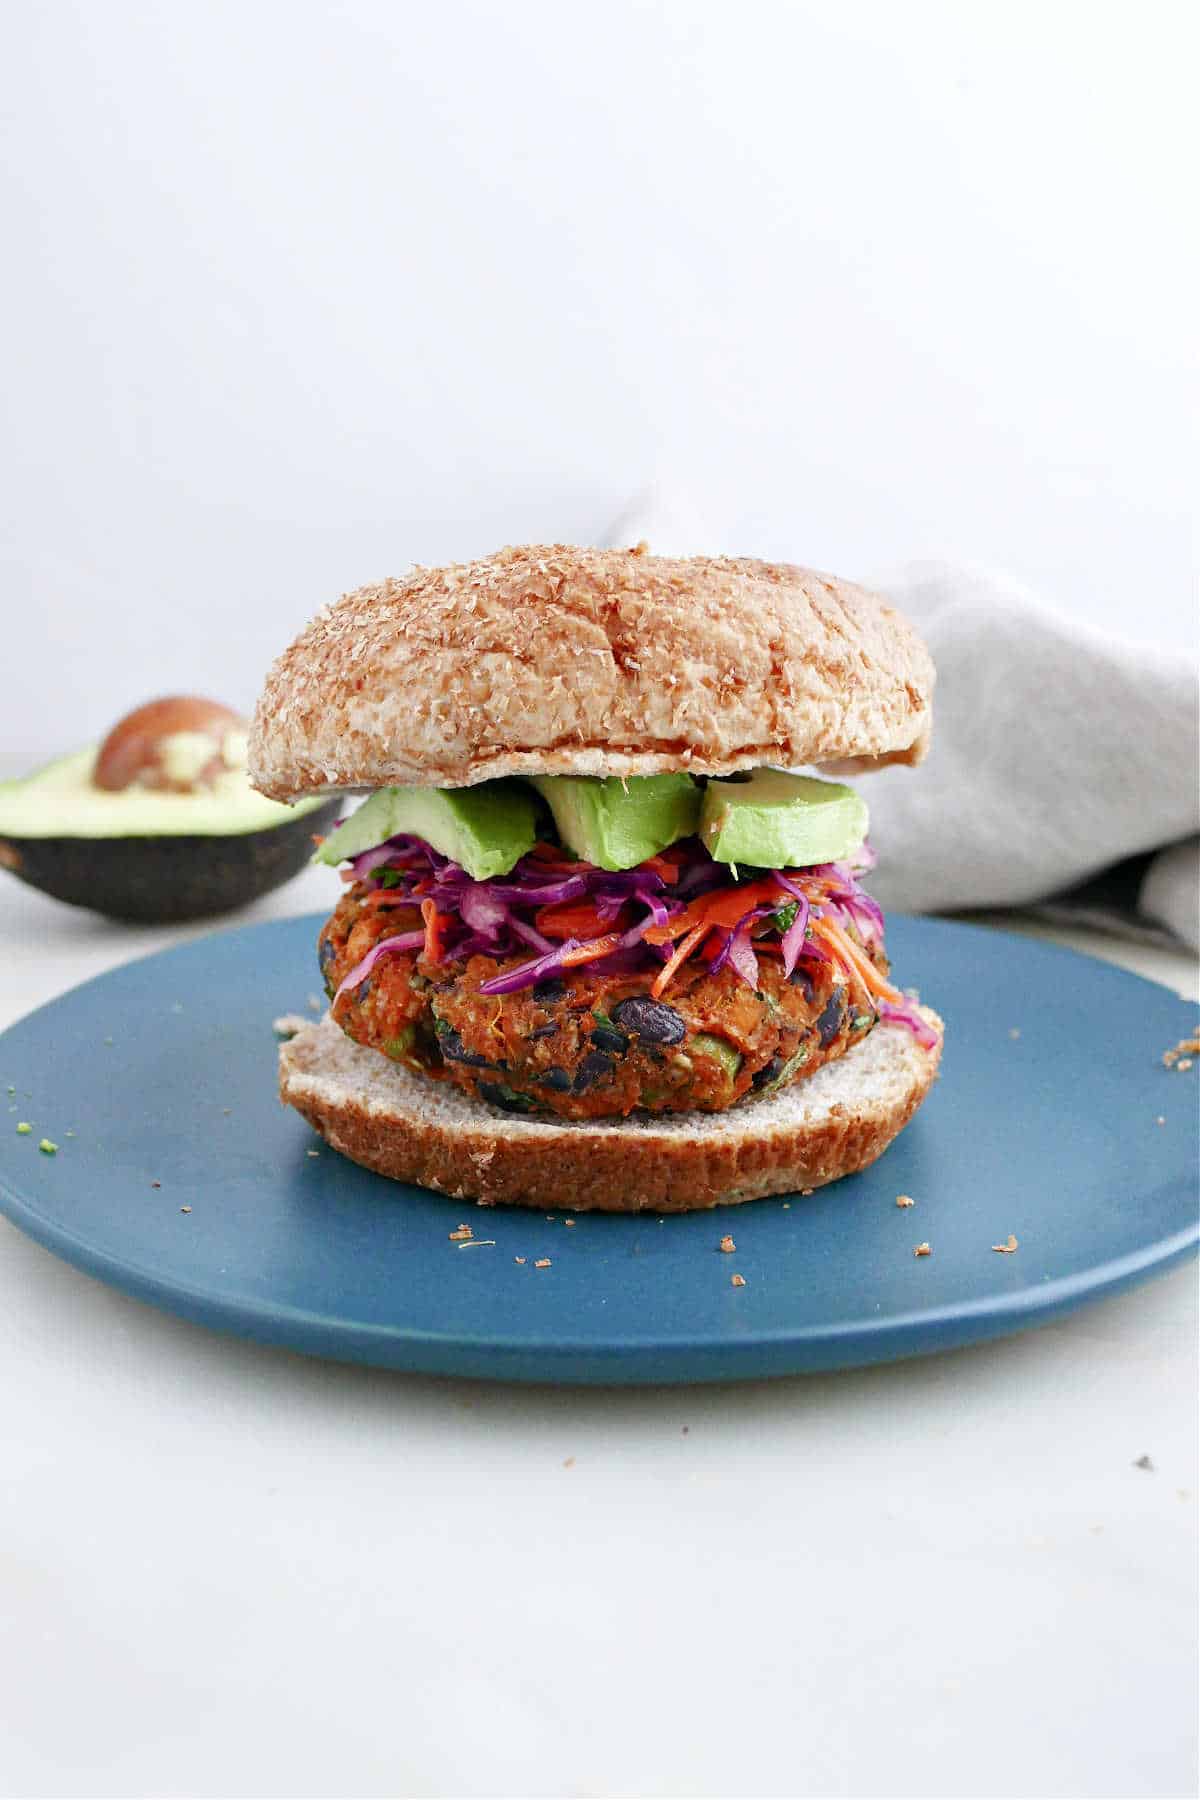 A sweet potato black bean burger with slaw and avocado slices on a blue plate.